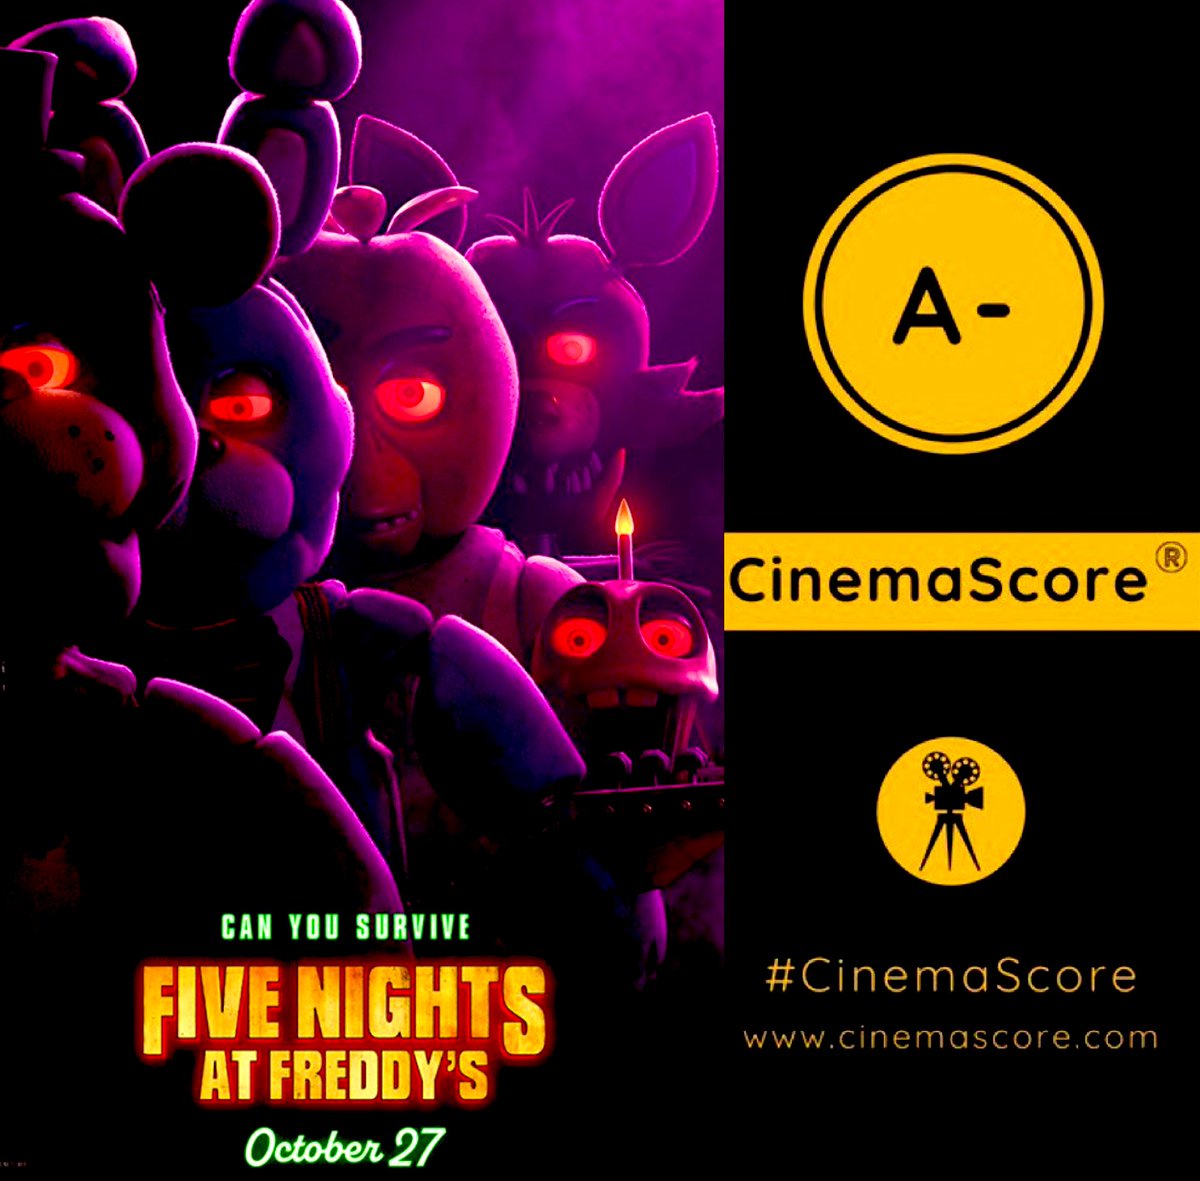 Audiences have spoken!!!
Critics may not have enjoyed #FiveNightsAtFreddys as much, but moviegoers LOVED #FNAF, giving the game-based horror a strong A- #Cinemascore, best ever for horror, on par with also PG-13 #AQuietPlace2.
2nd best ever for videogame adaptations, only under